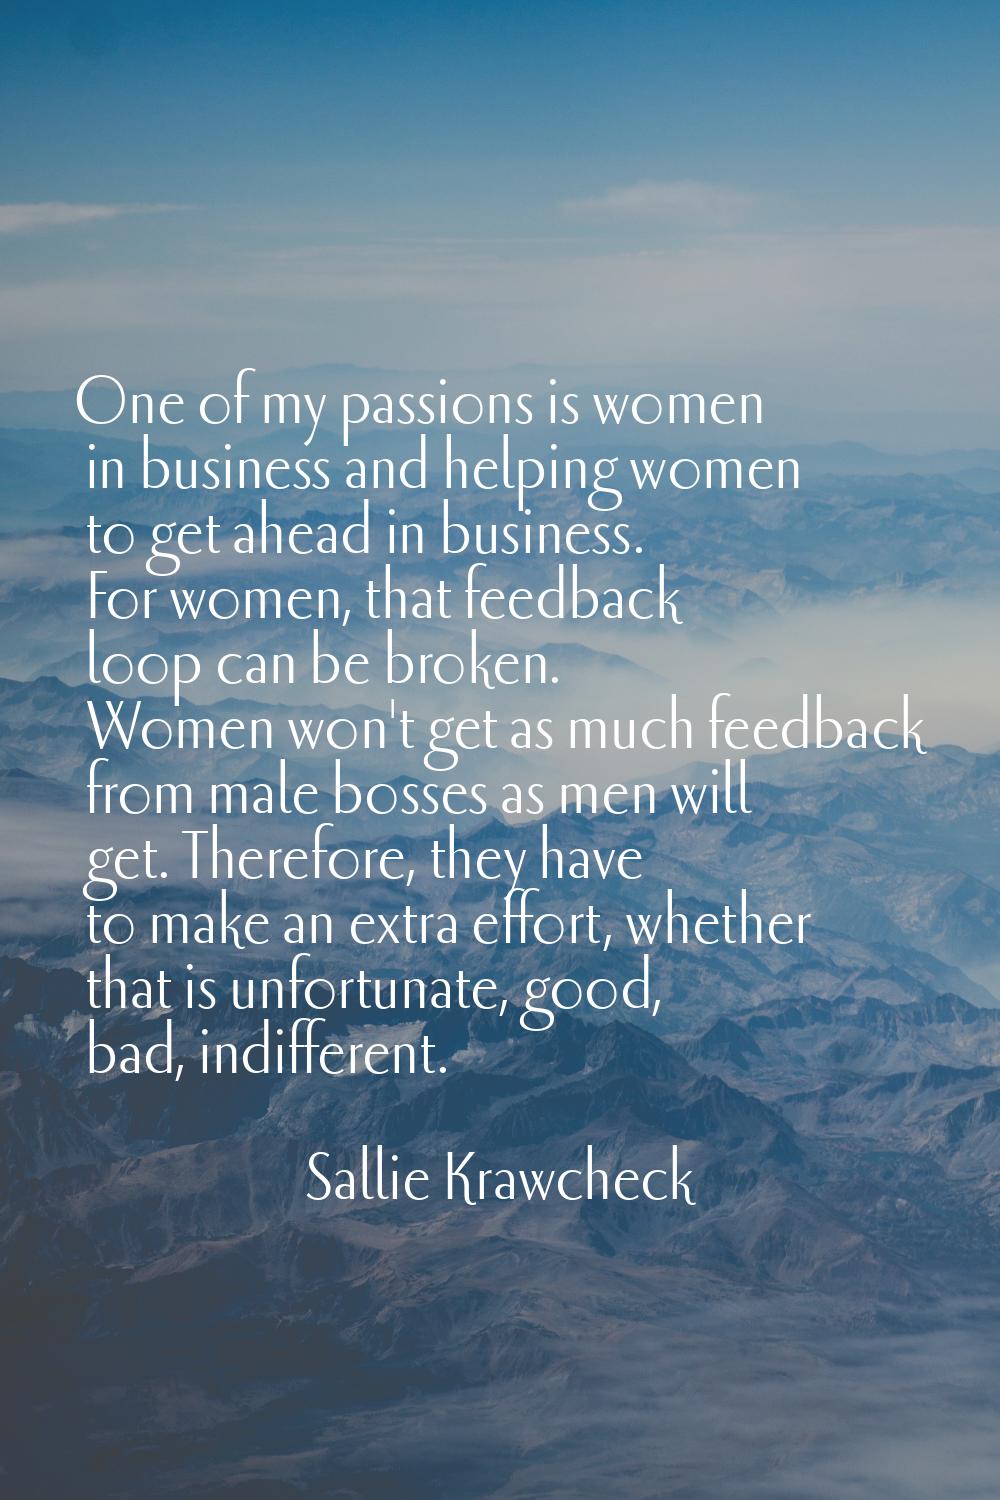 One of my passions is women in business and helping women to get ahead in business. For women, that